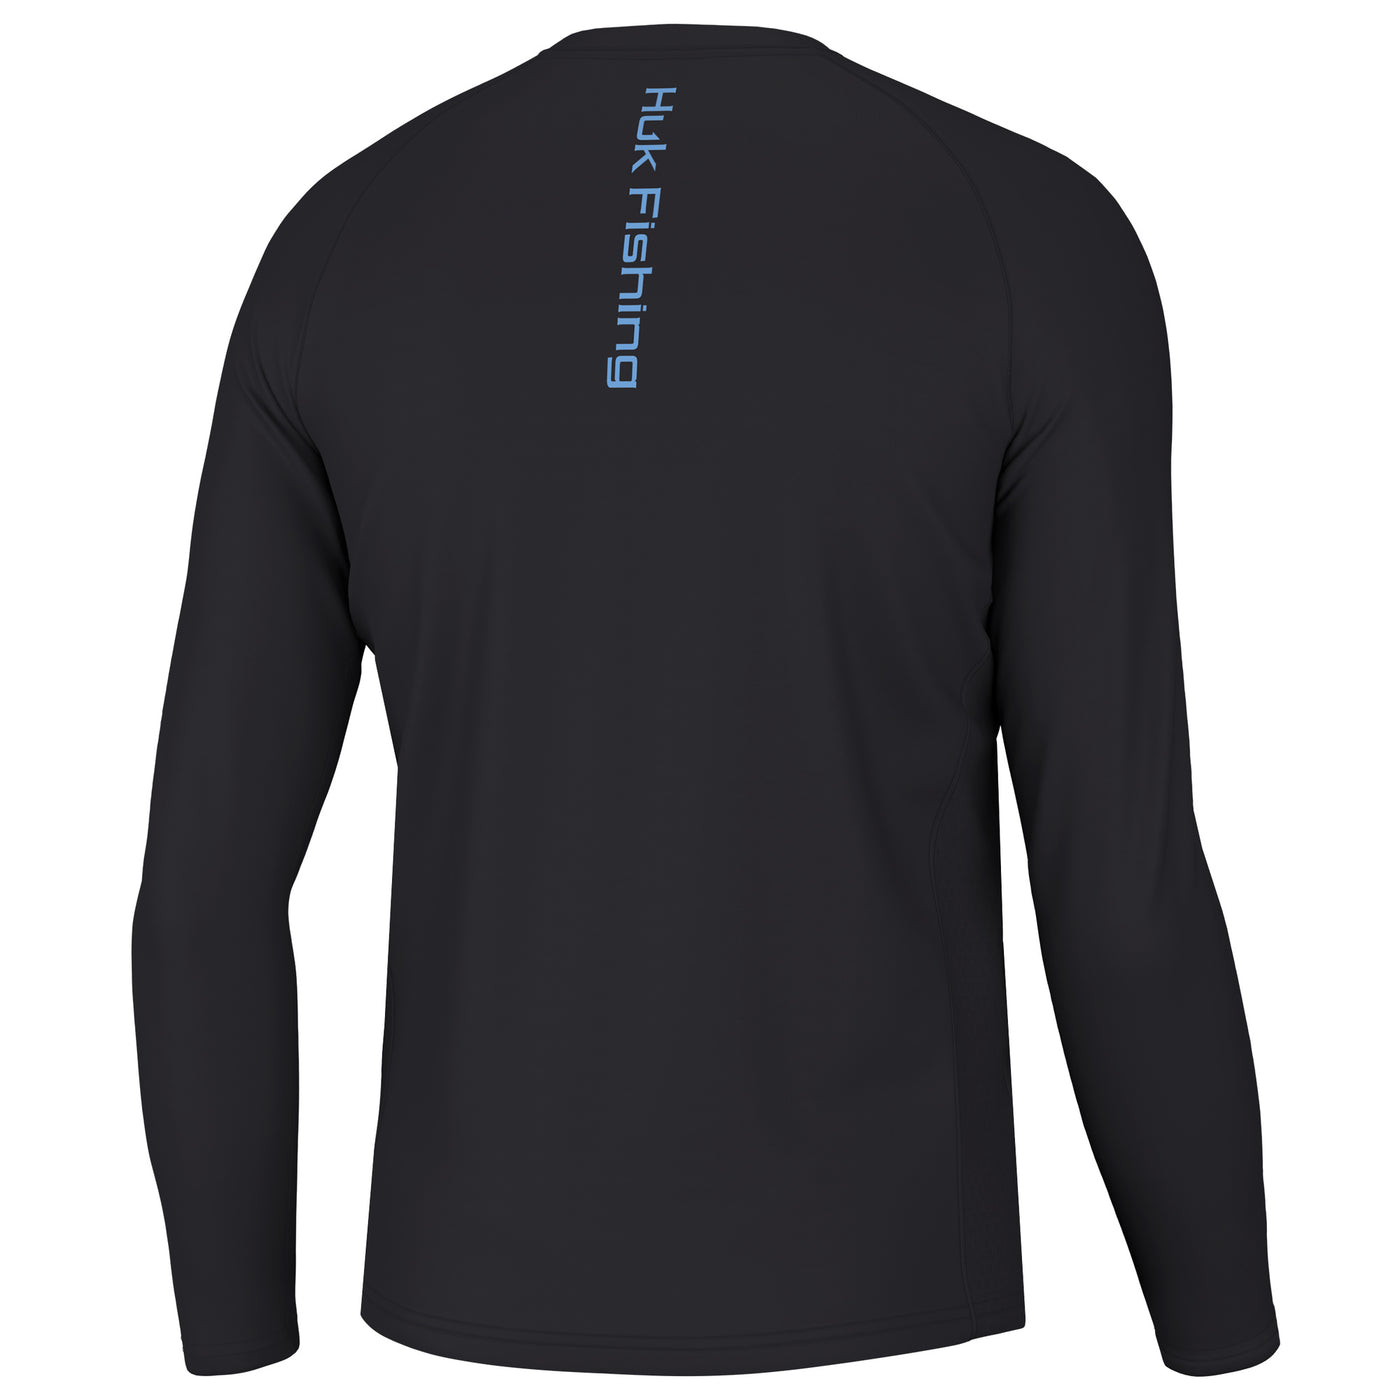 Huk Gear Performance shirt - small - clothing & accessories - by owner -  apparel sale - craigslist